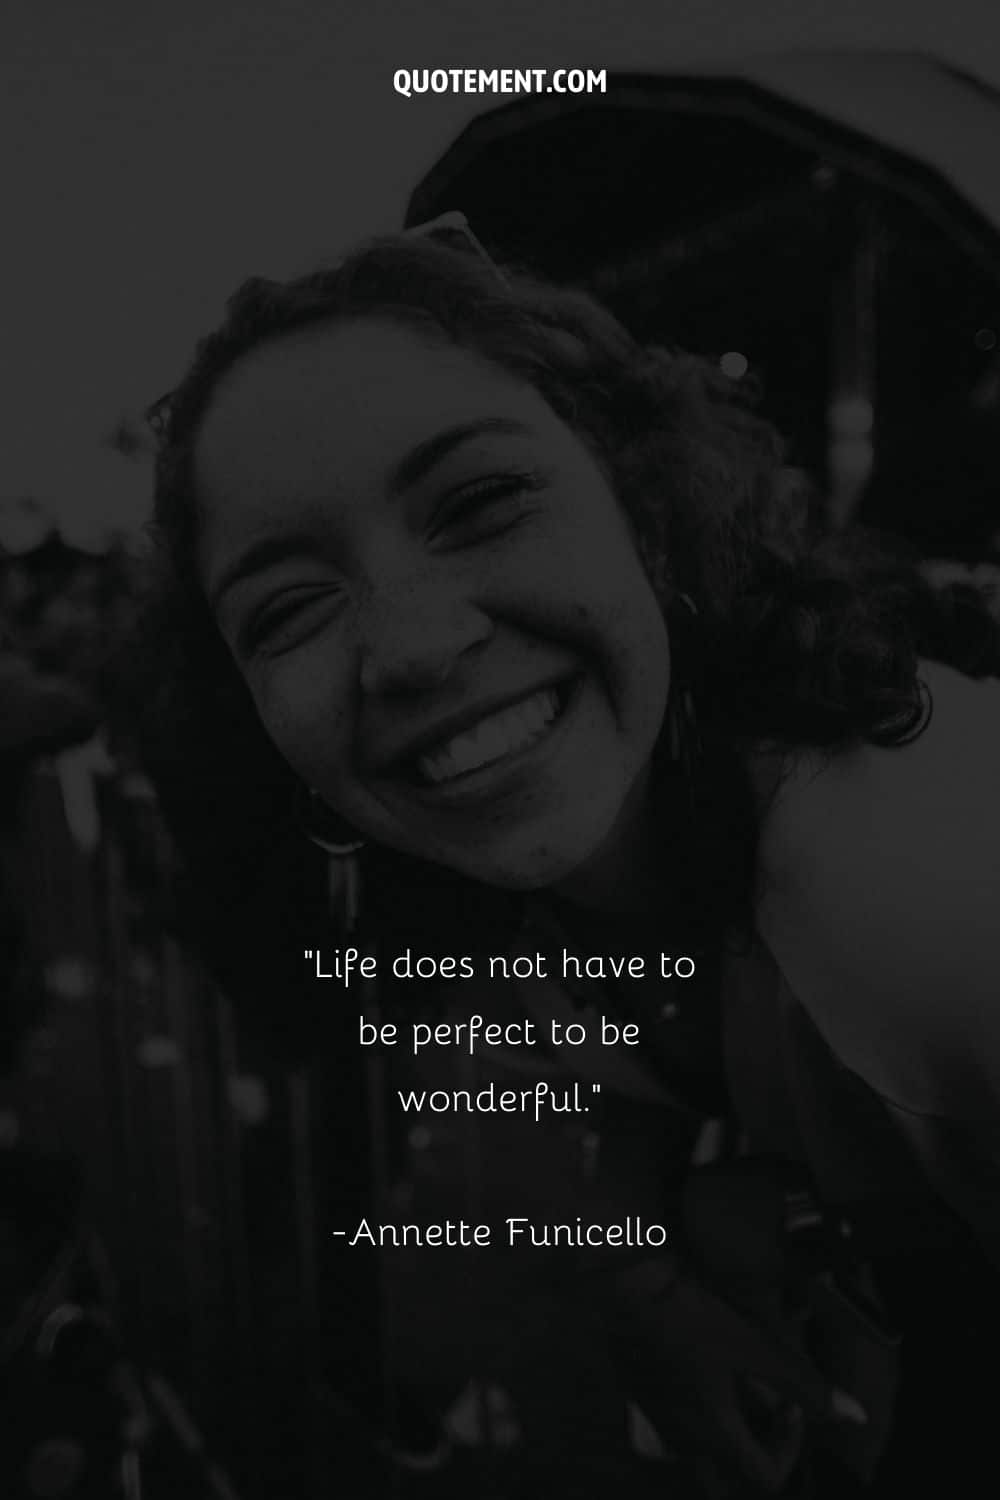 image of a girl laughing representing life is sweet quote
